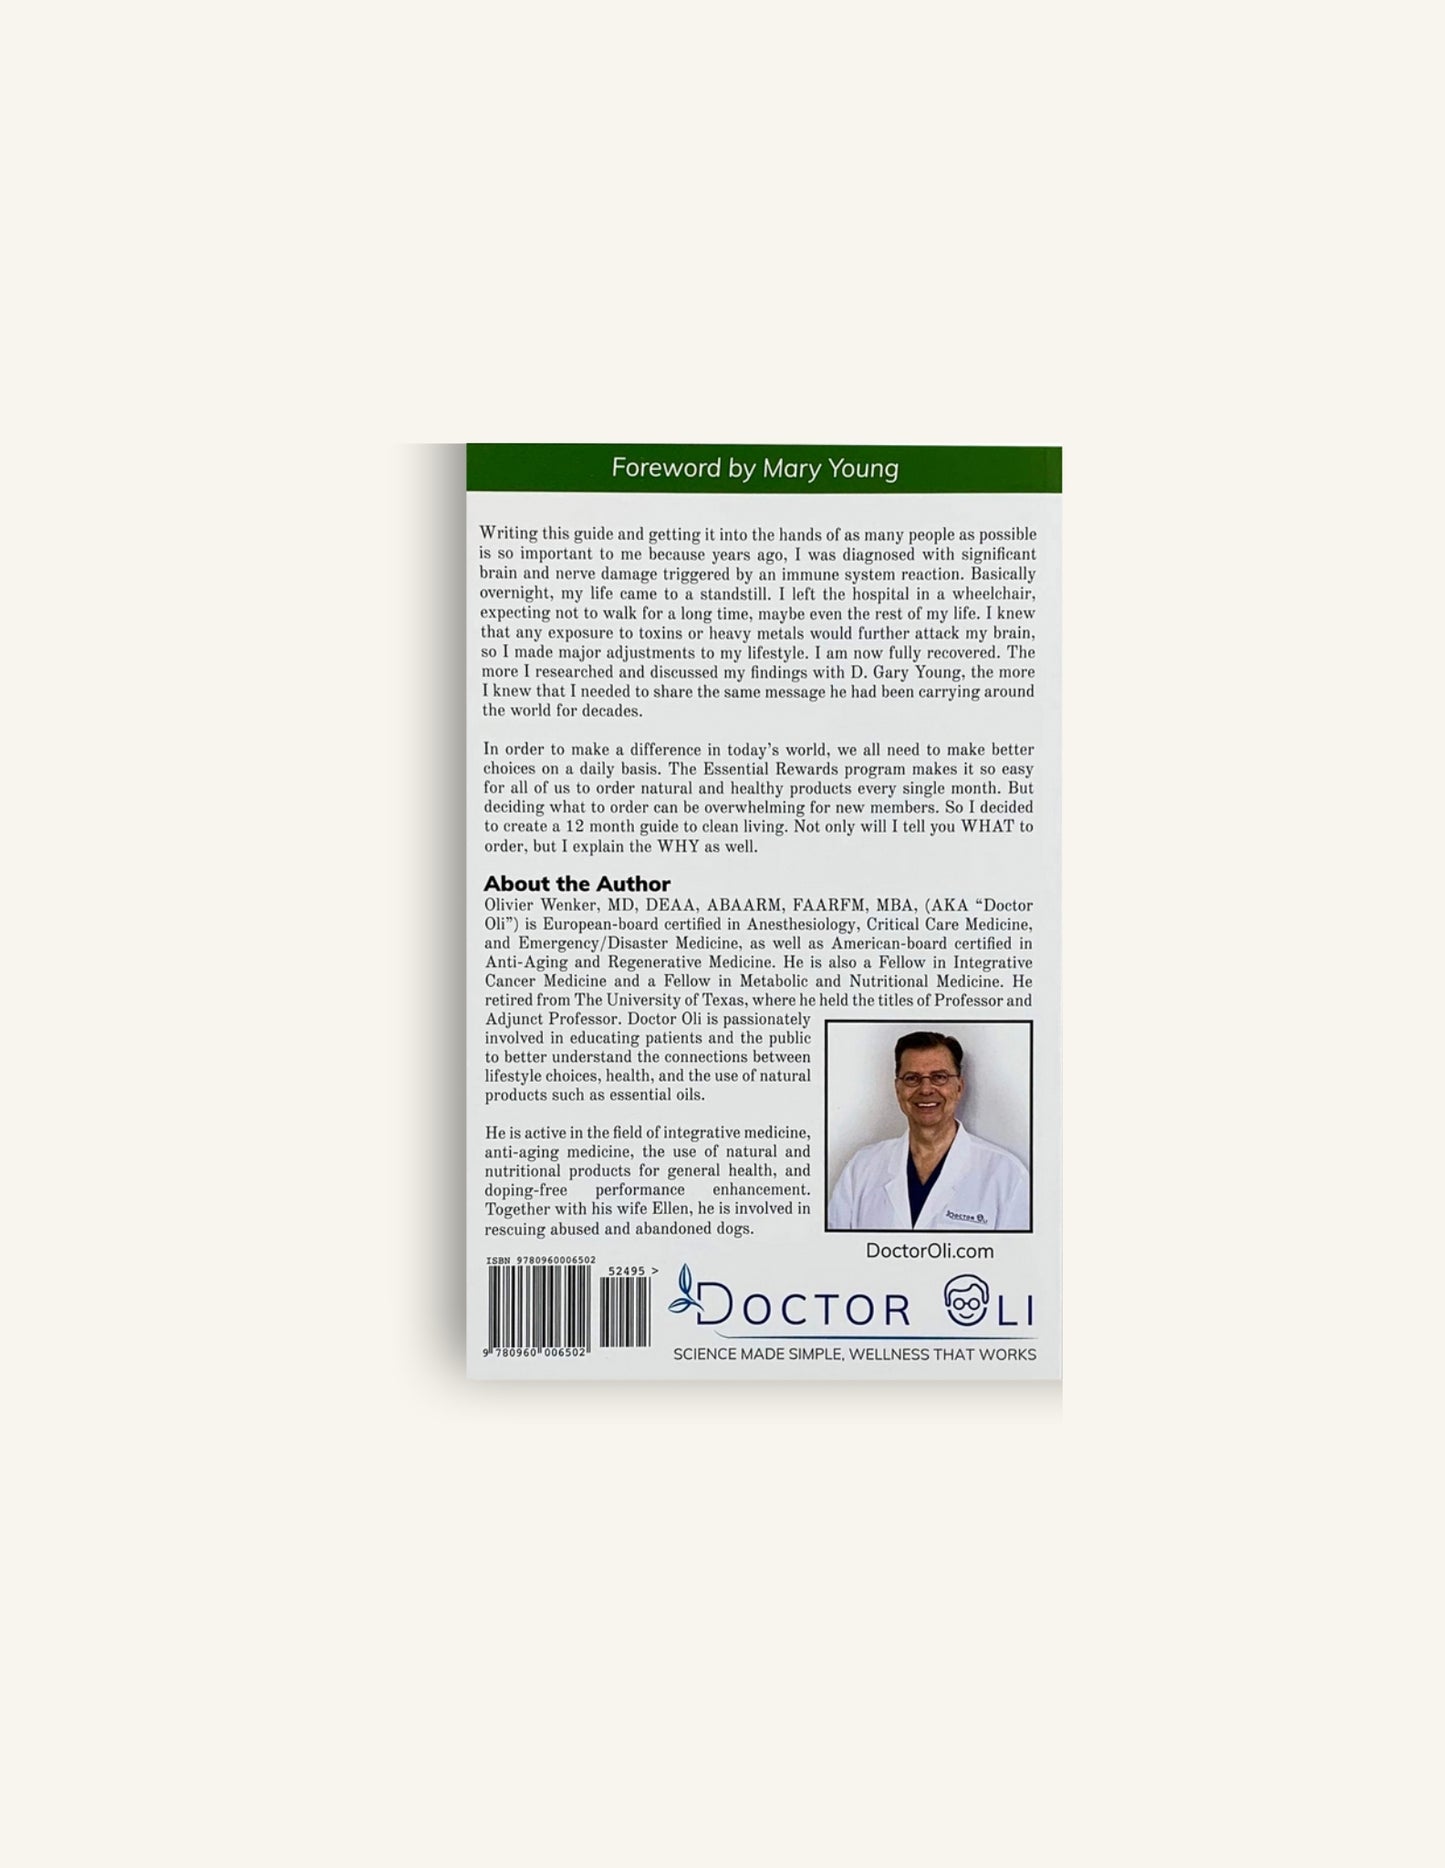 A Doctor's Guide to Essential Rewards, Oli Wenker, MD